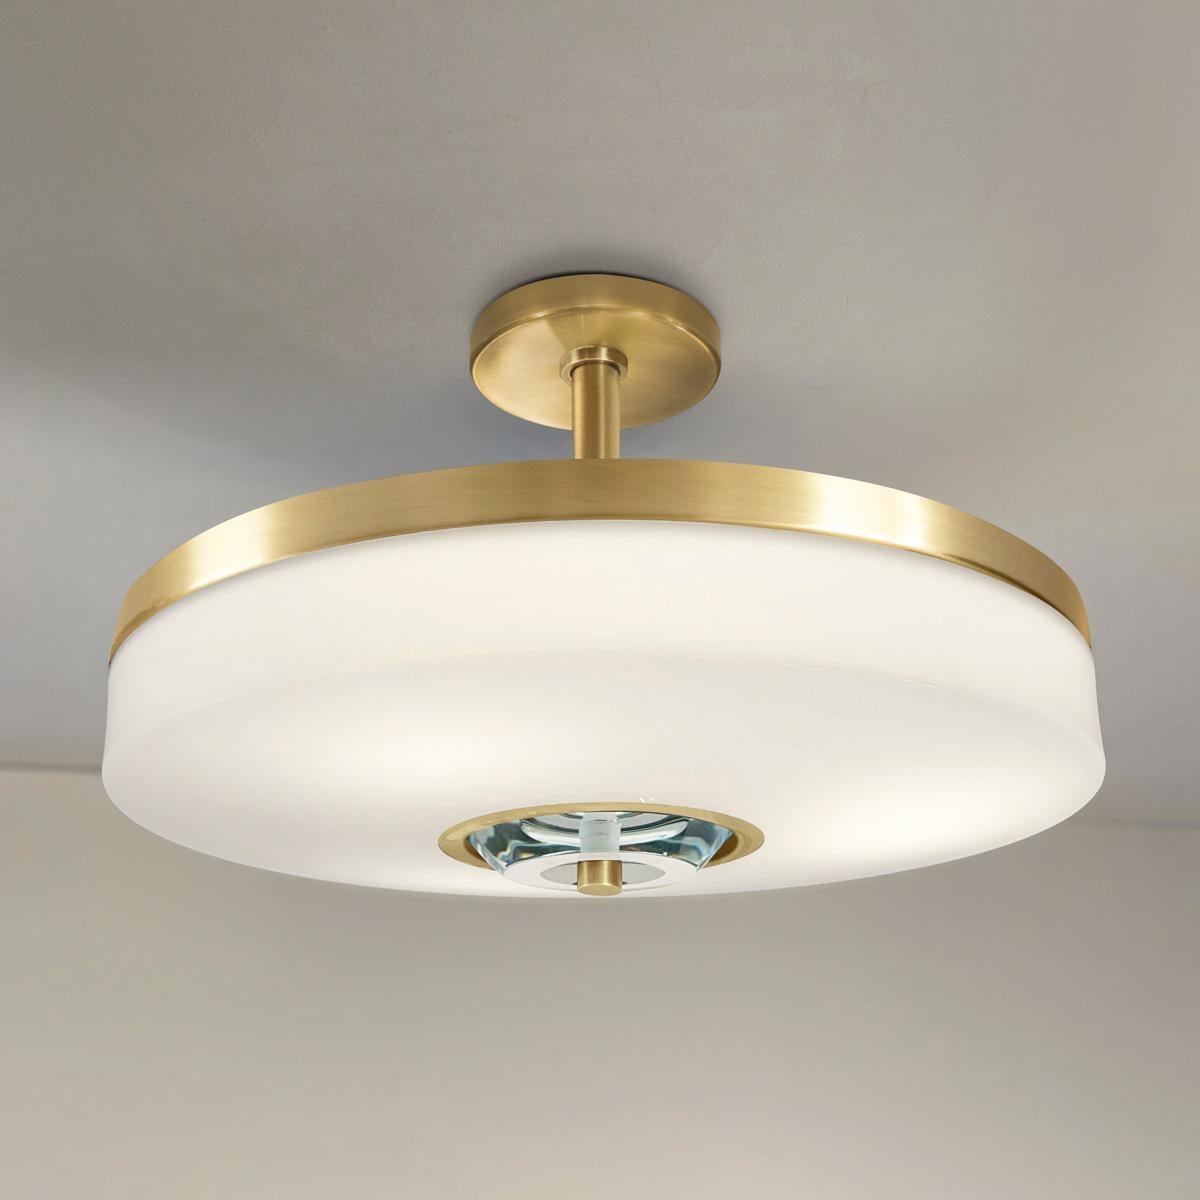 Italian Iris Piccolo Ceiling Light by Gaspare Asaro- Polished Nickel Finish For Sale